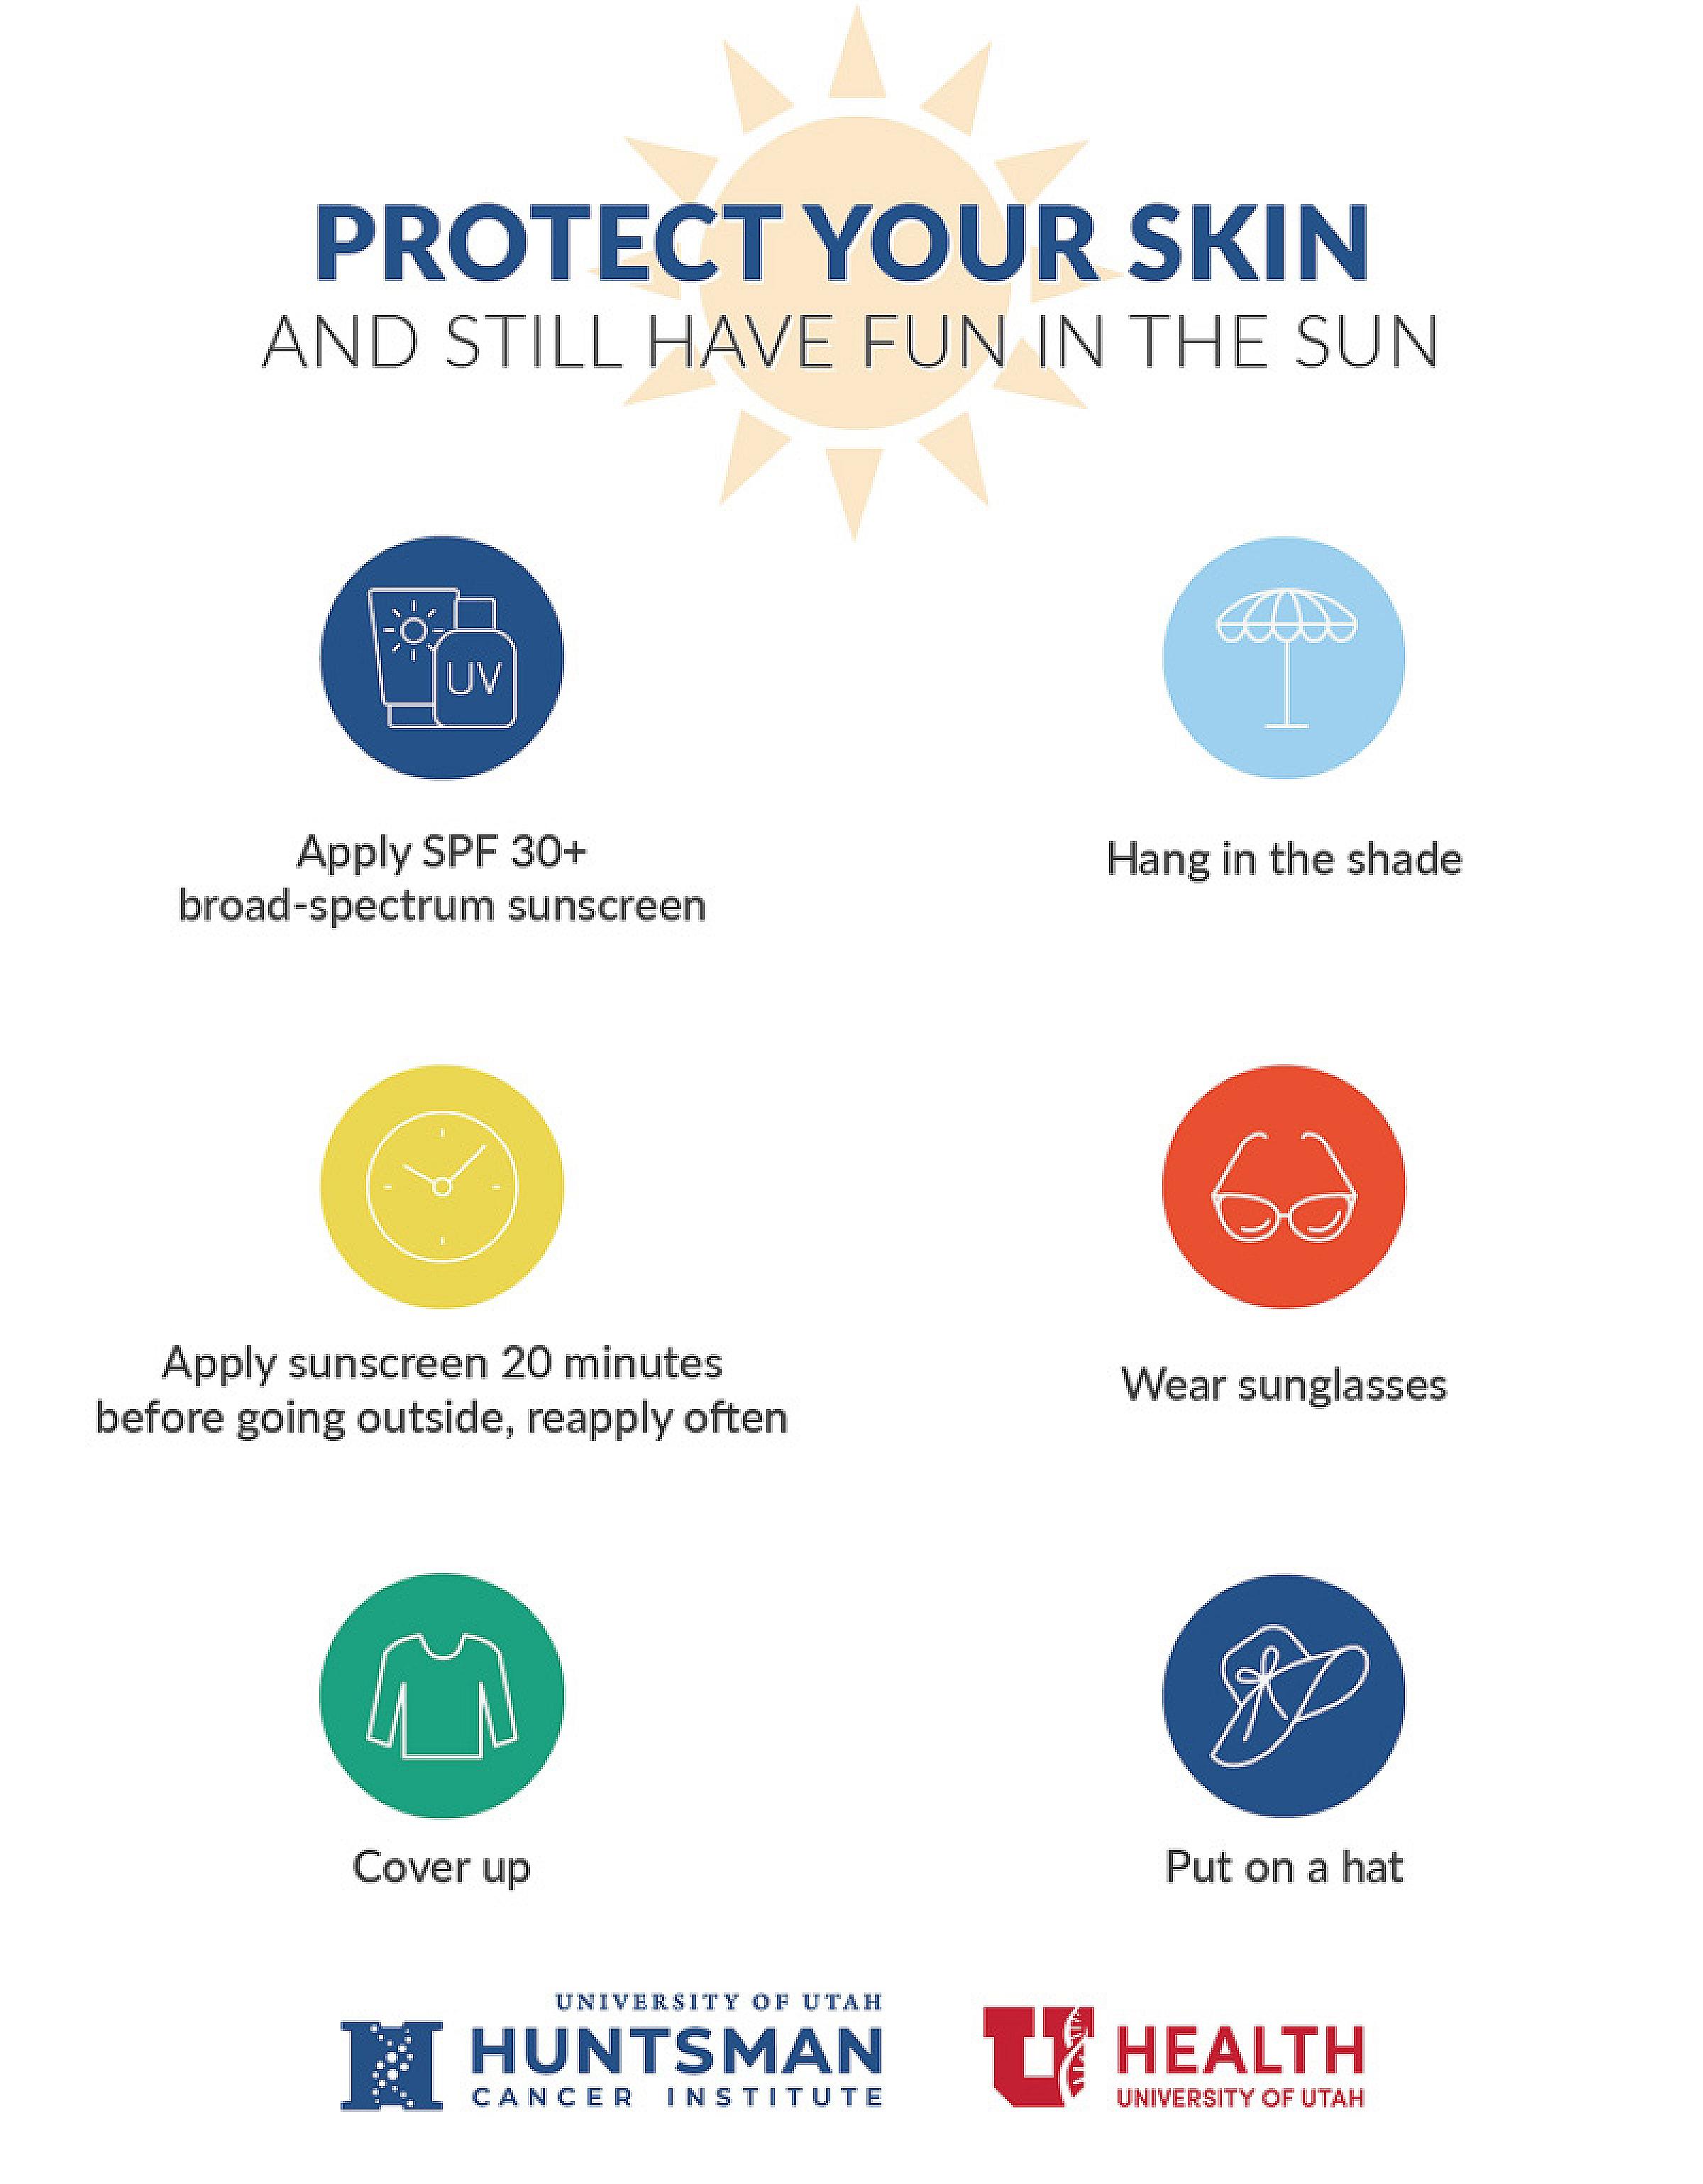 Protect your skin and still have fun in the sun: Apply SPF 30+ broad-spectrum sunscreen, hang in the shade, apply sunscreen 20 minutes before going outside and reapply often, wear sunglasses, cover up, and put on a hat